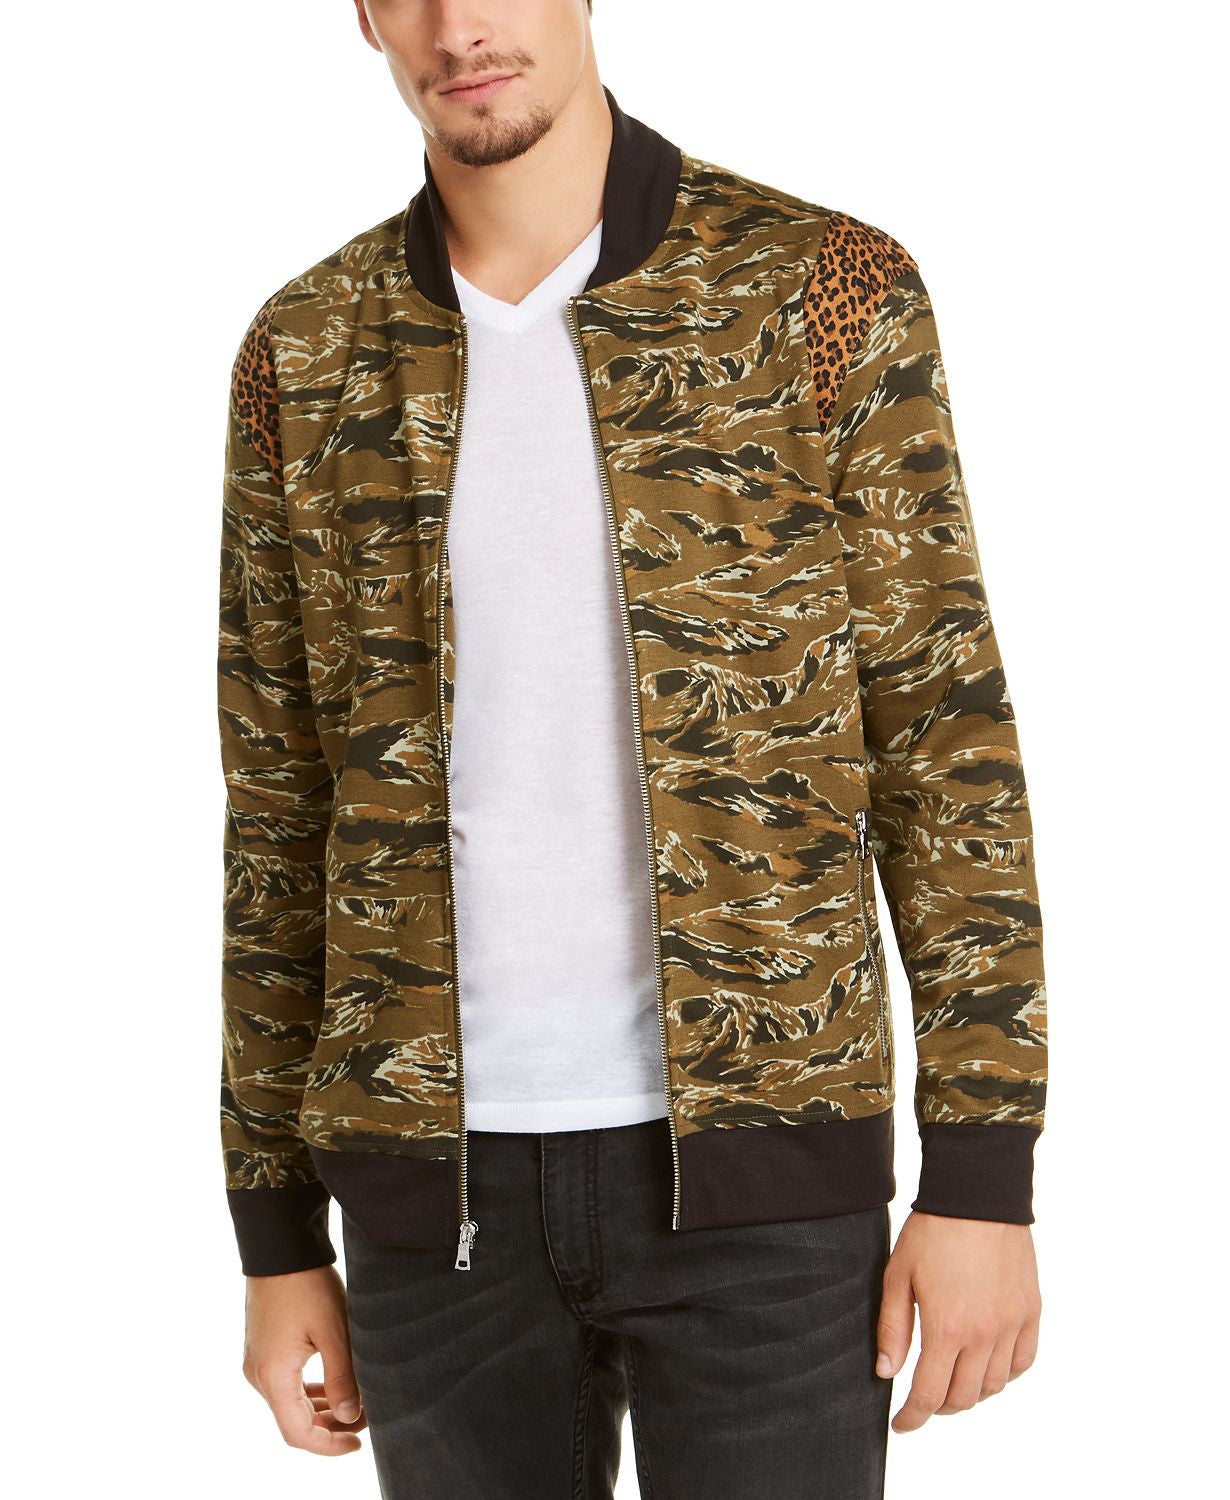 Inc International Concepts Vices Abstract Camouflage Print Bomber Jacket Dark Olive